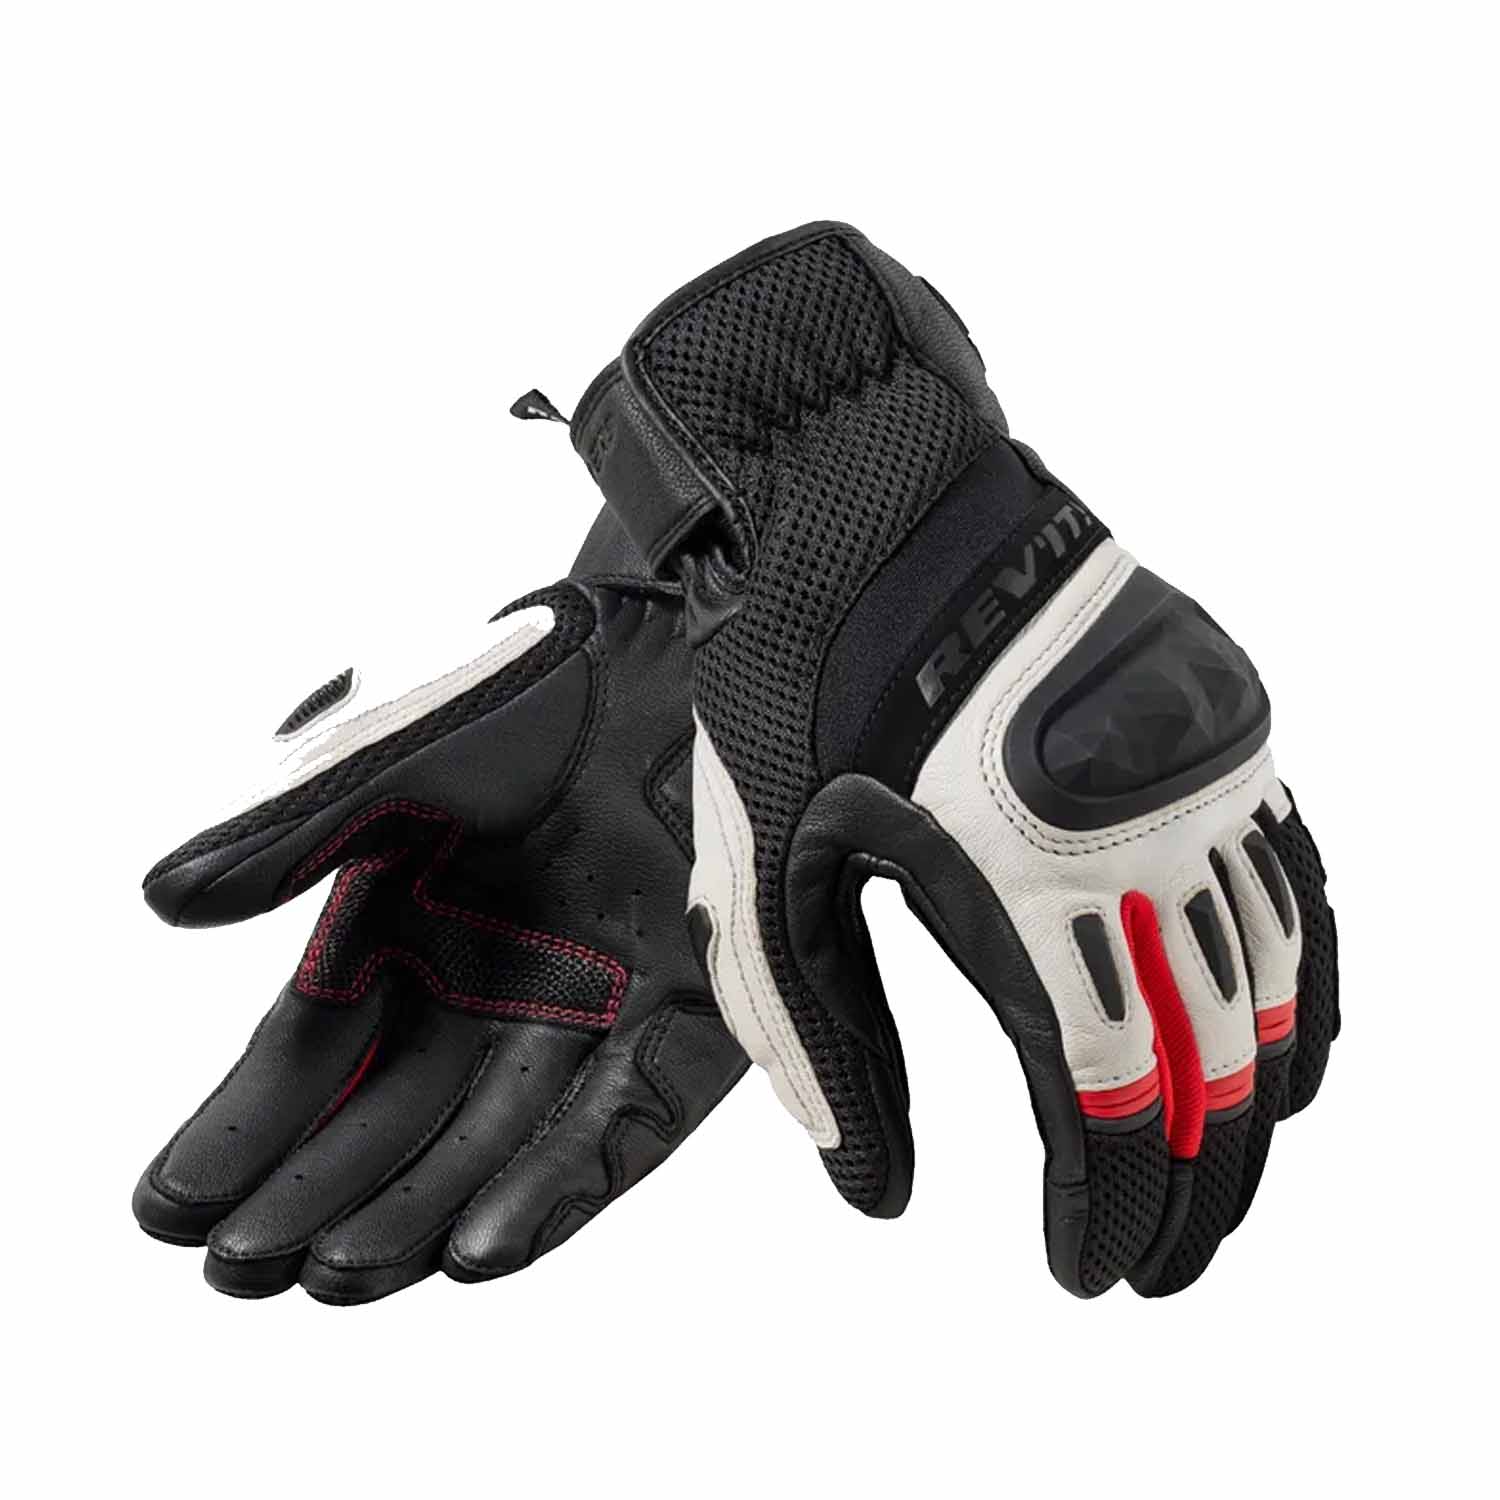 Image of REV'IT! Dirt 4 Gloves Black Red Taille 3XL